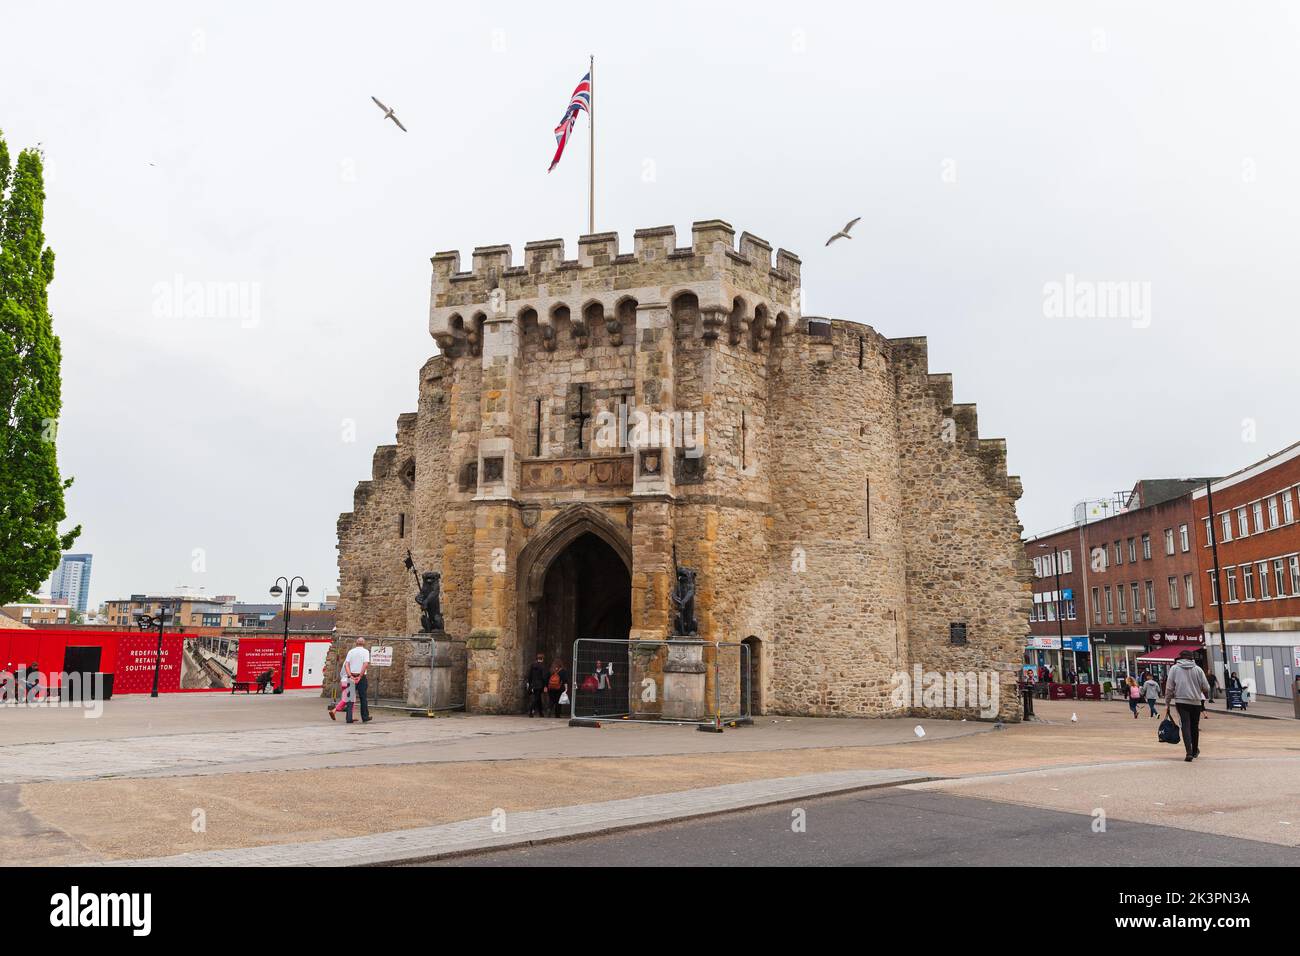 Southampton, United Kingdom - April 23, 2019: The Bargate is a medieval gatehouse in the city of Southampton, England Stock Photo